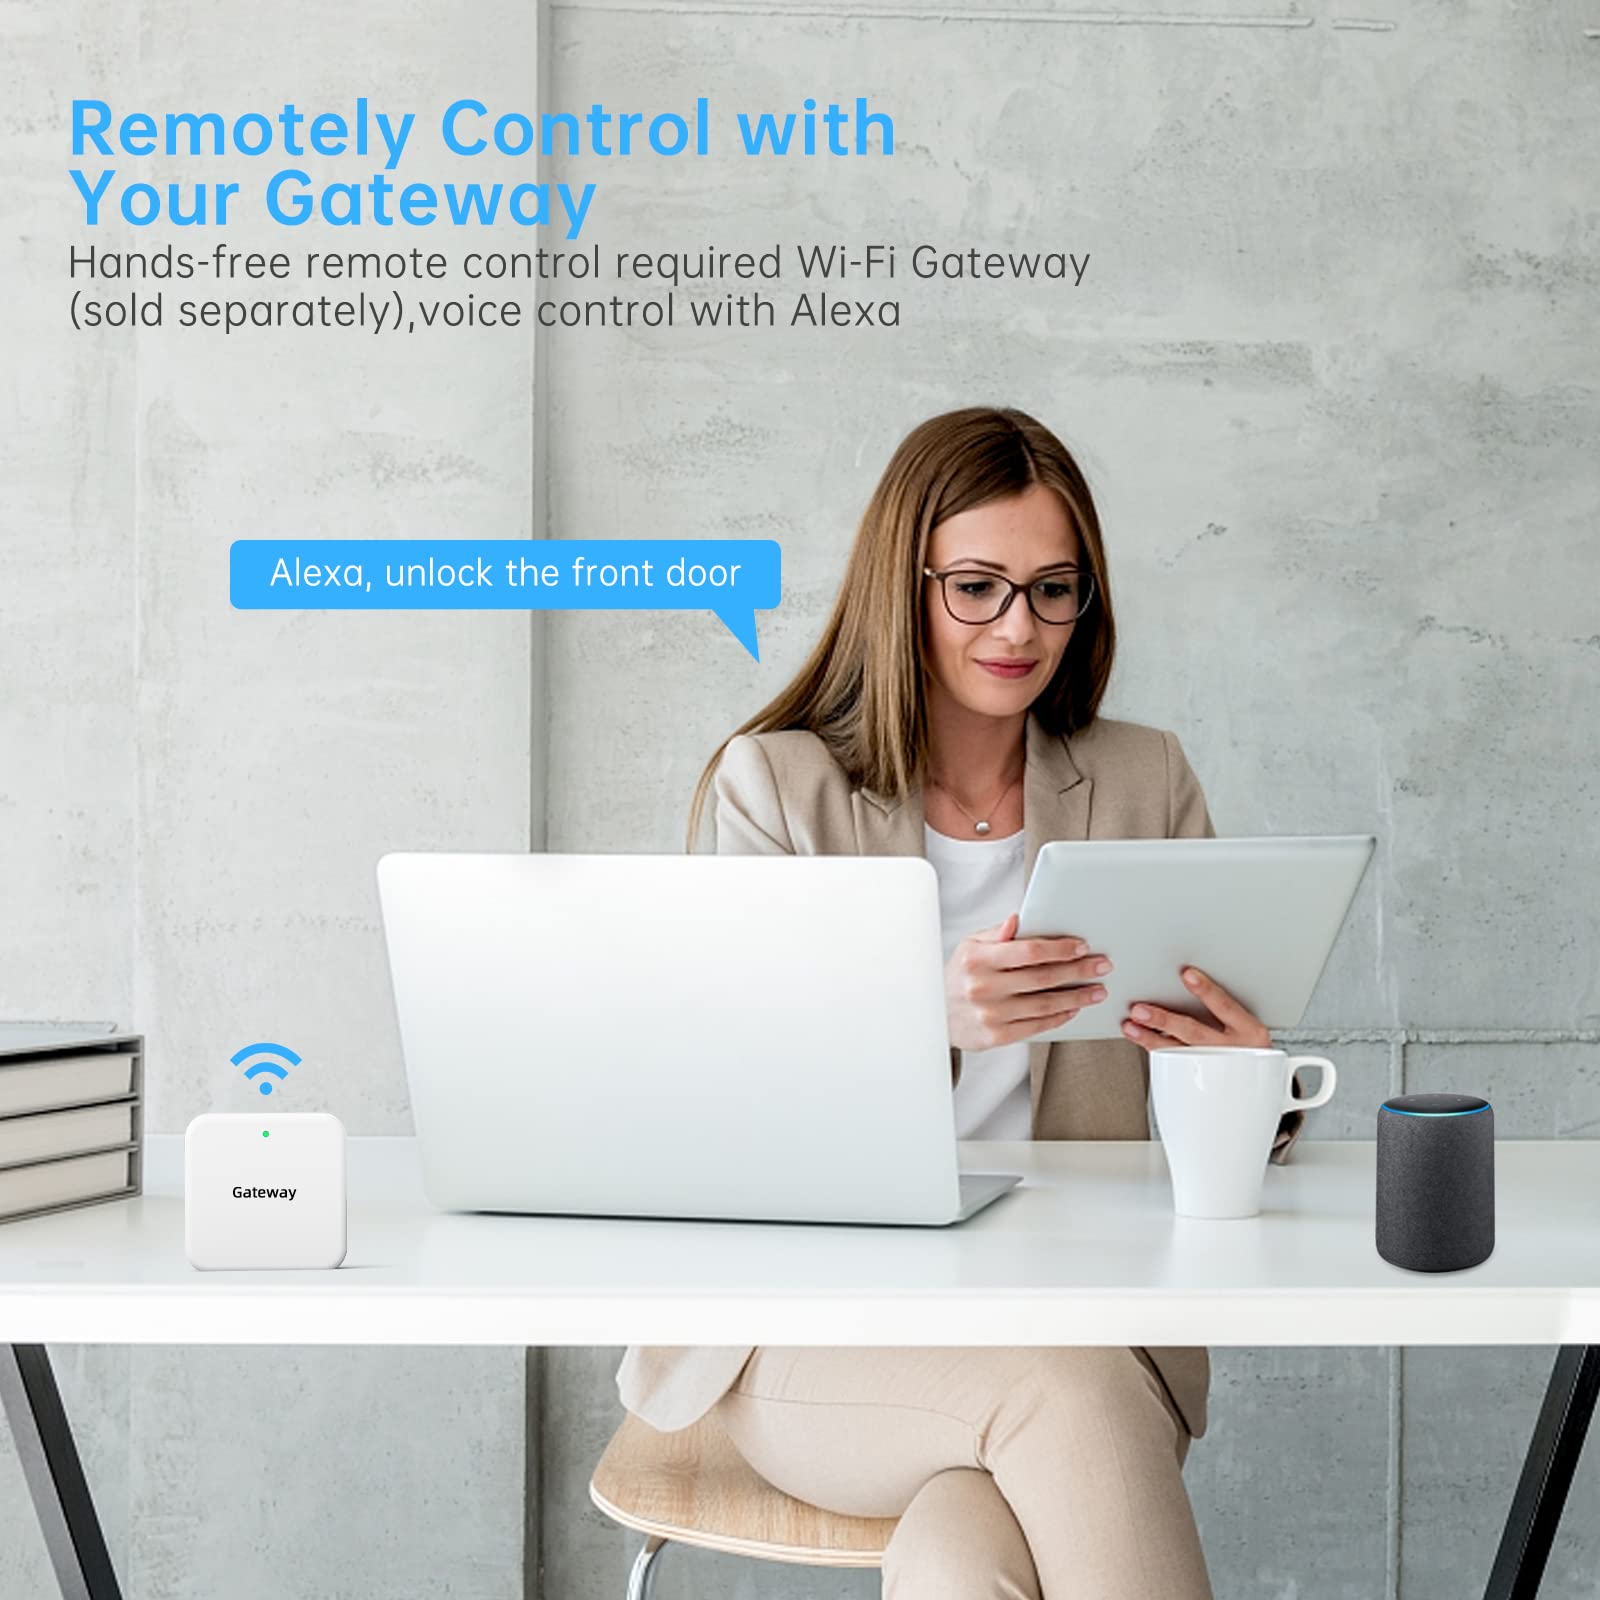 remotely control